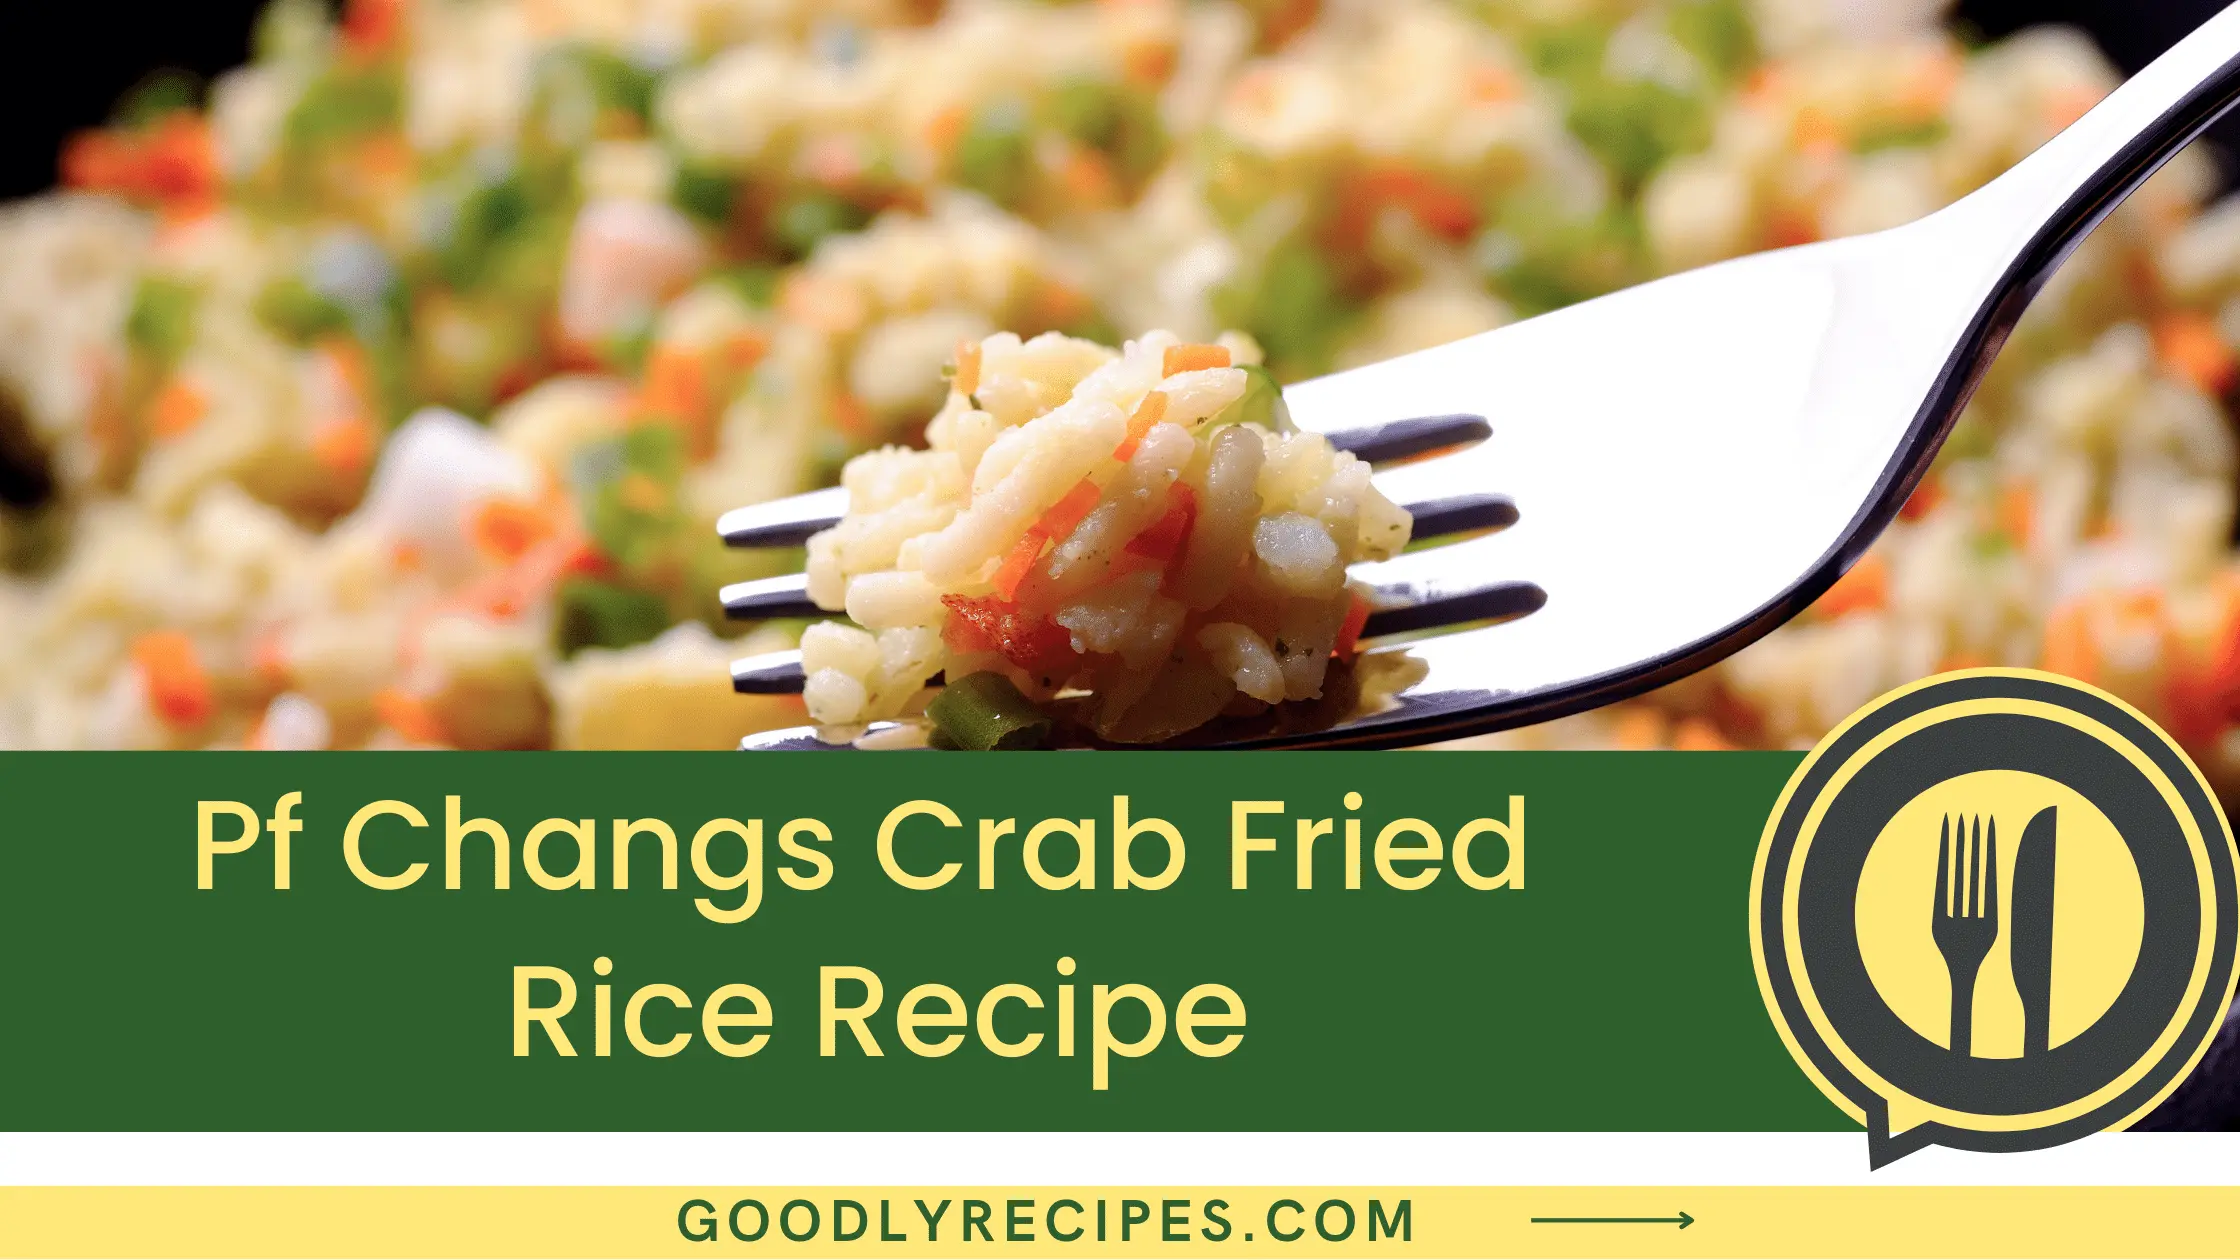 What is Pf Changs Crab Fried Rice?